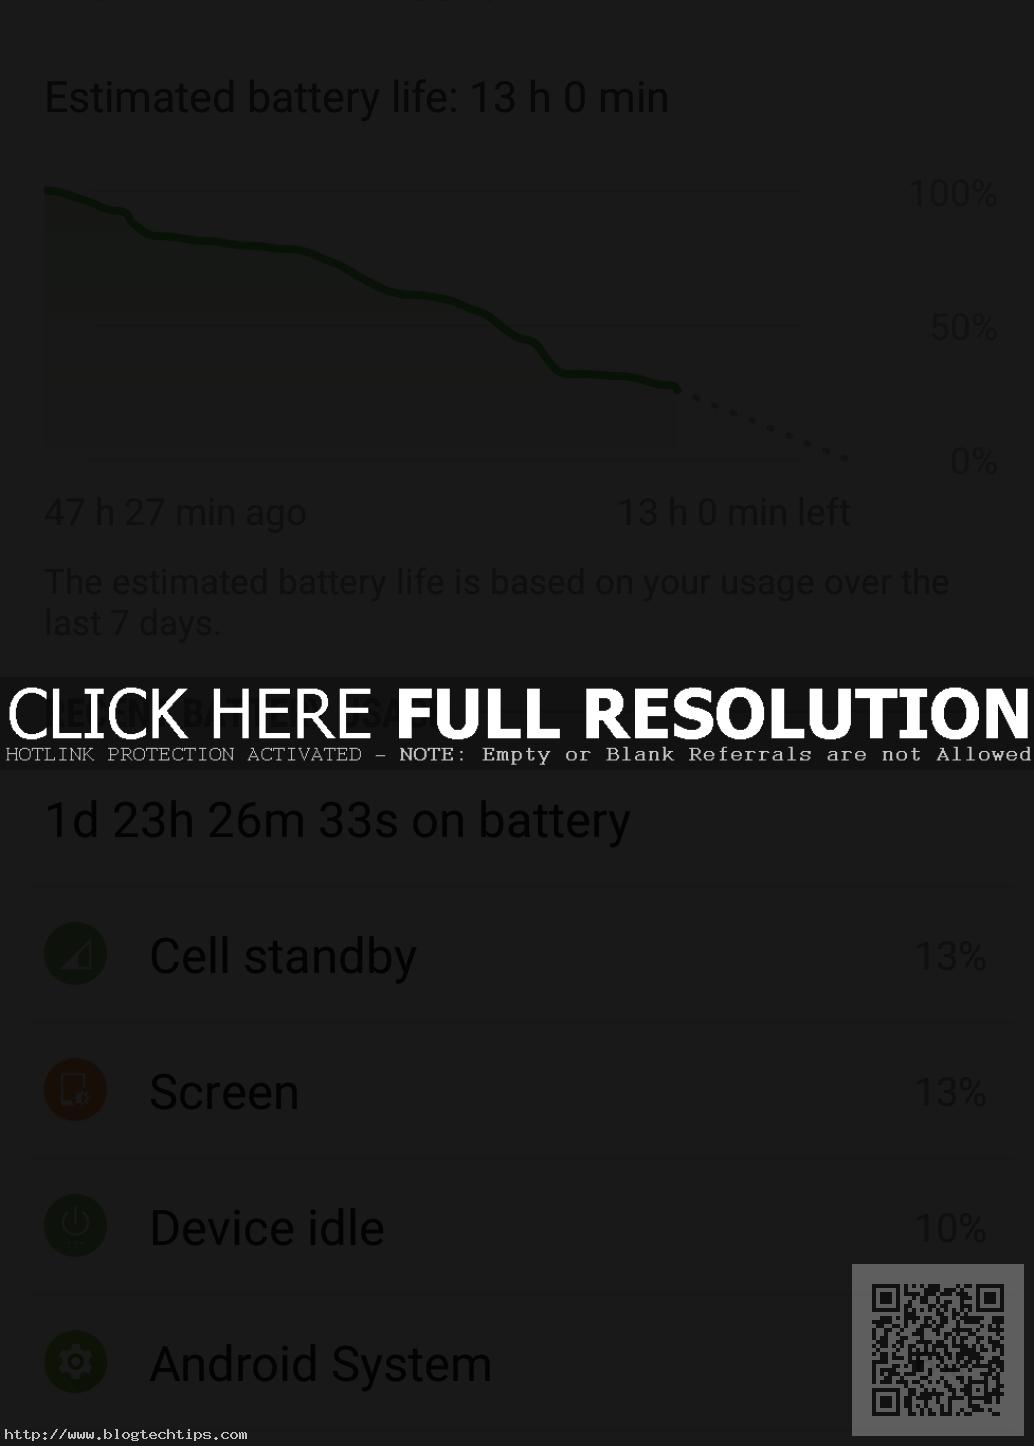 Cell standby using battery pack